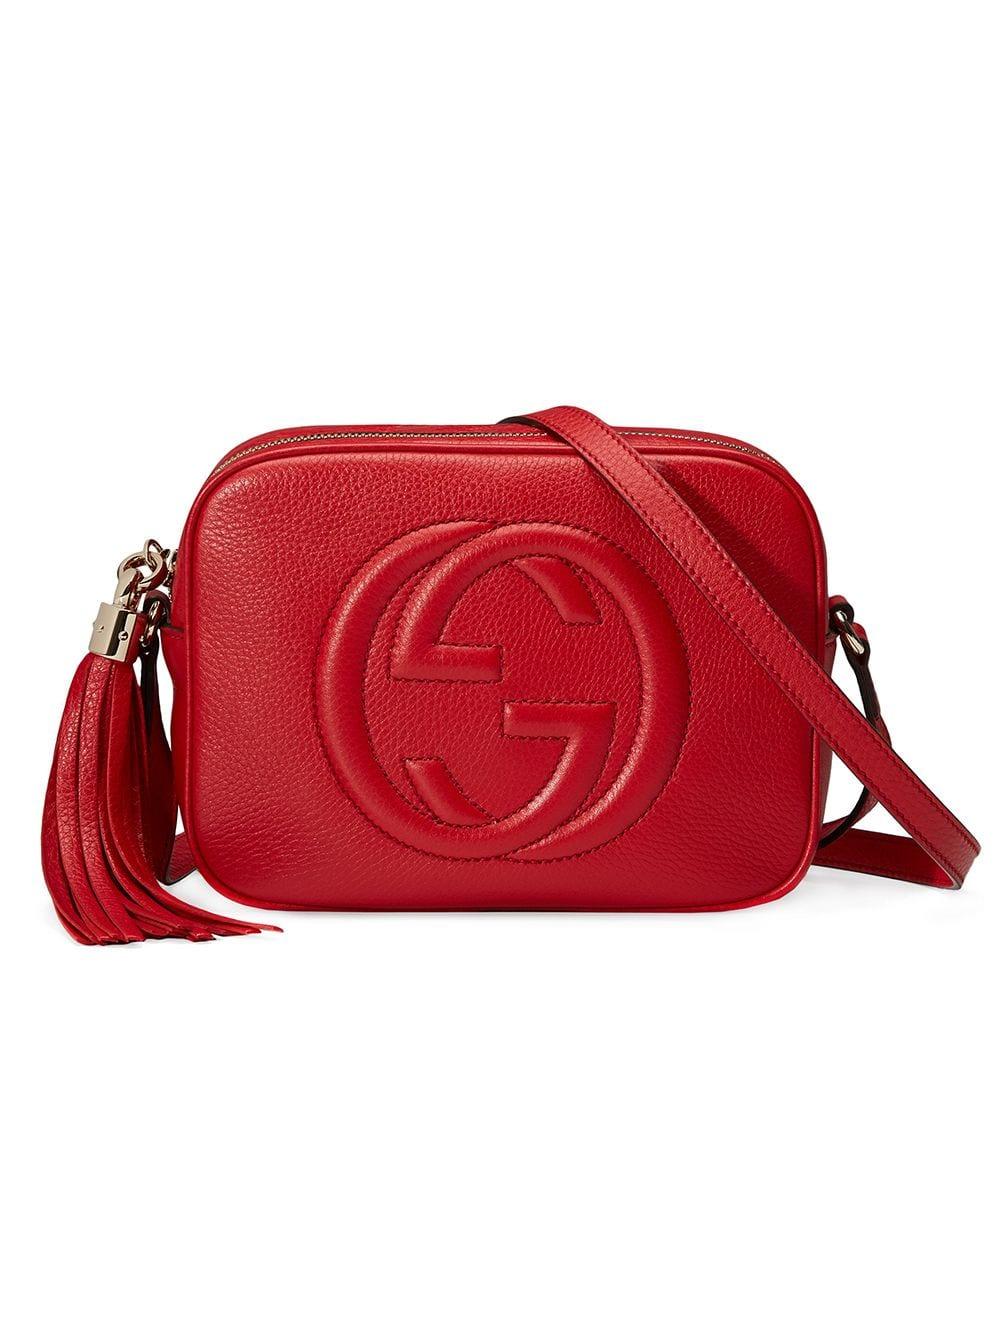 Gucci Soho Disco Small Leather Shoulder Bag in Red | Lyst